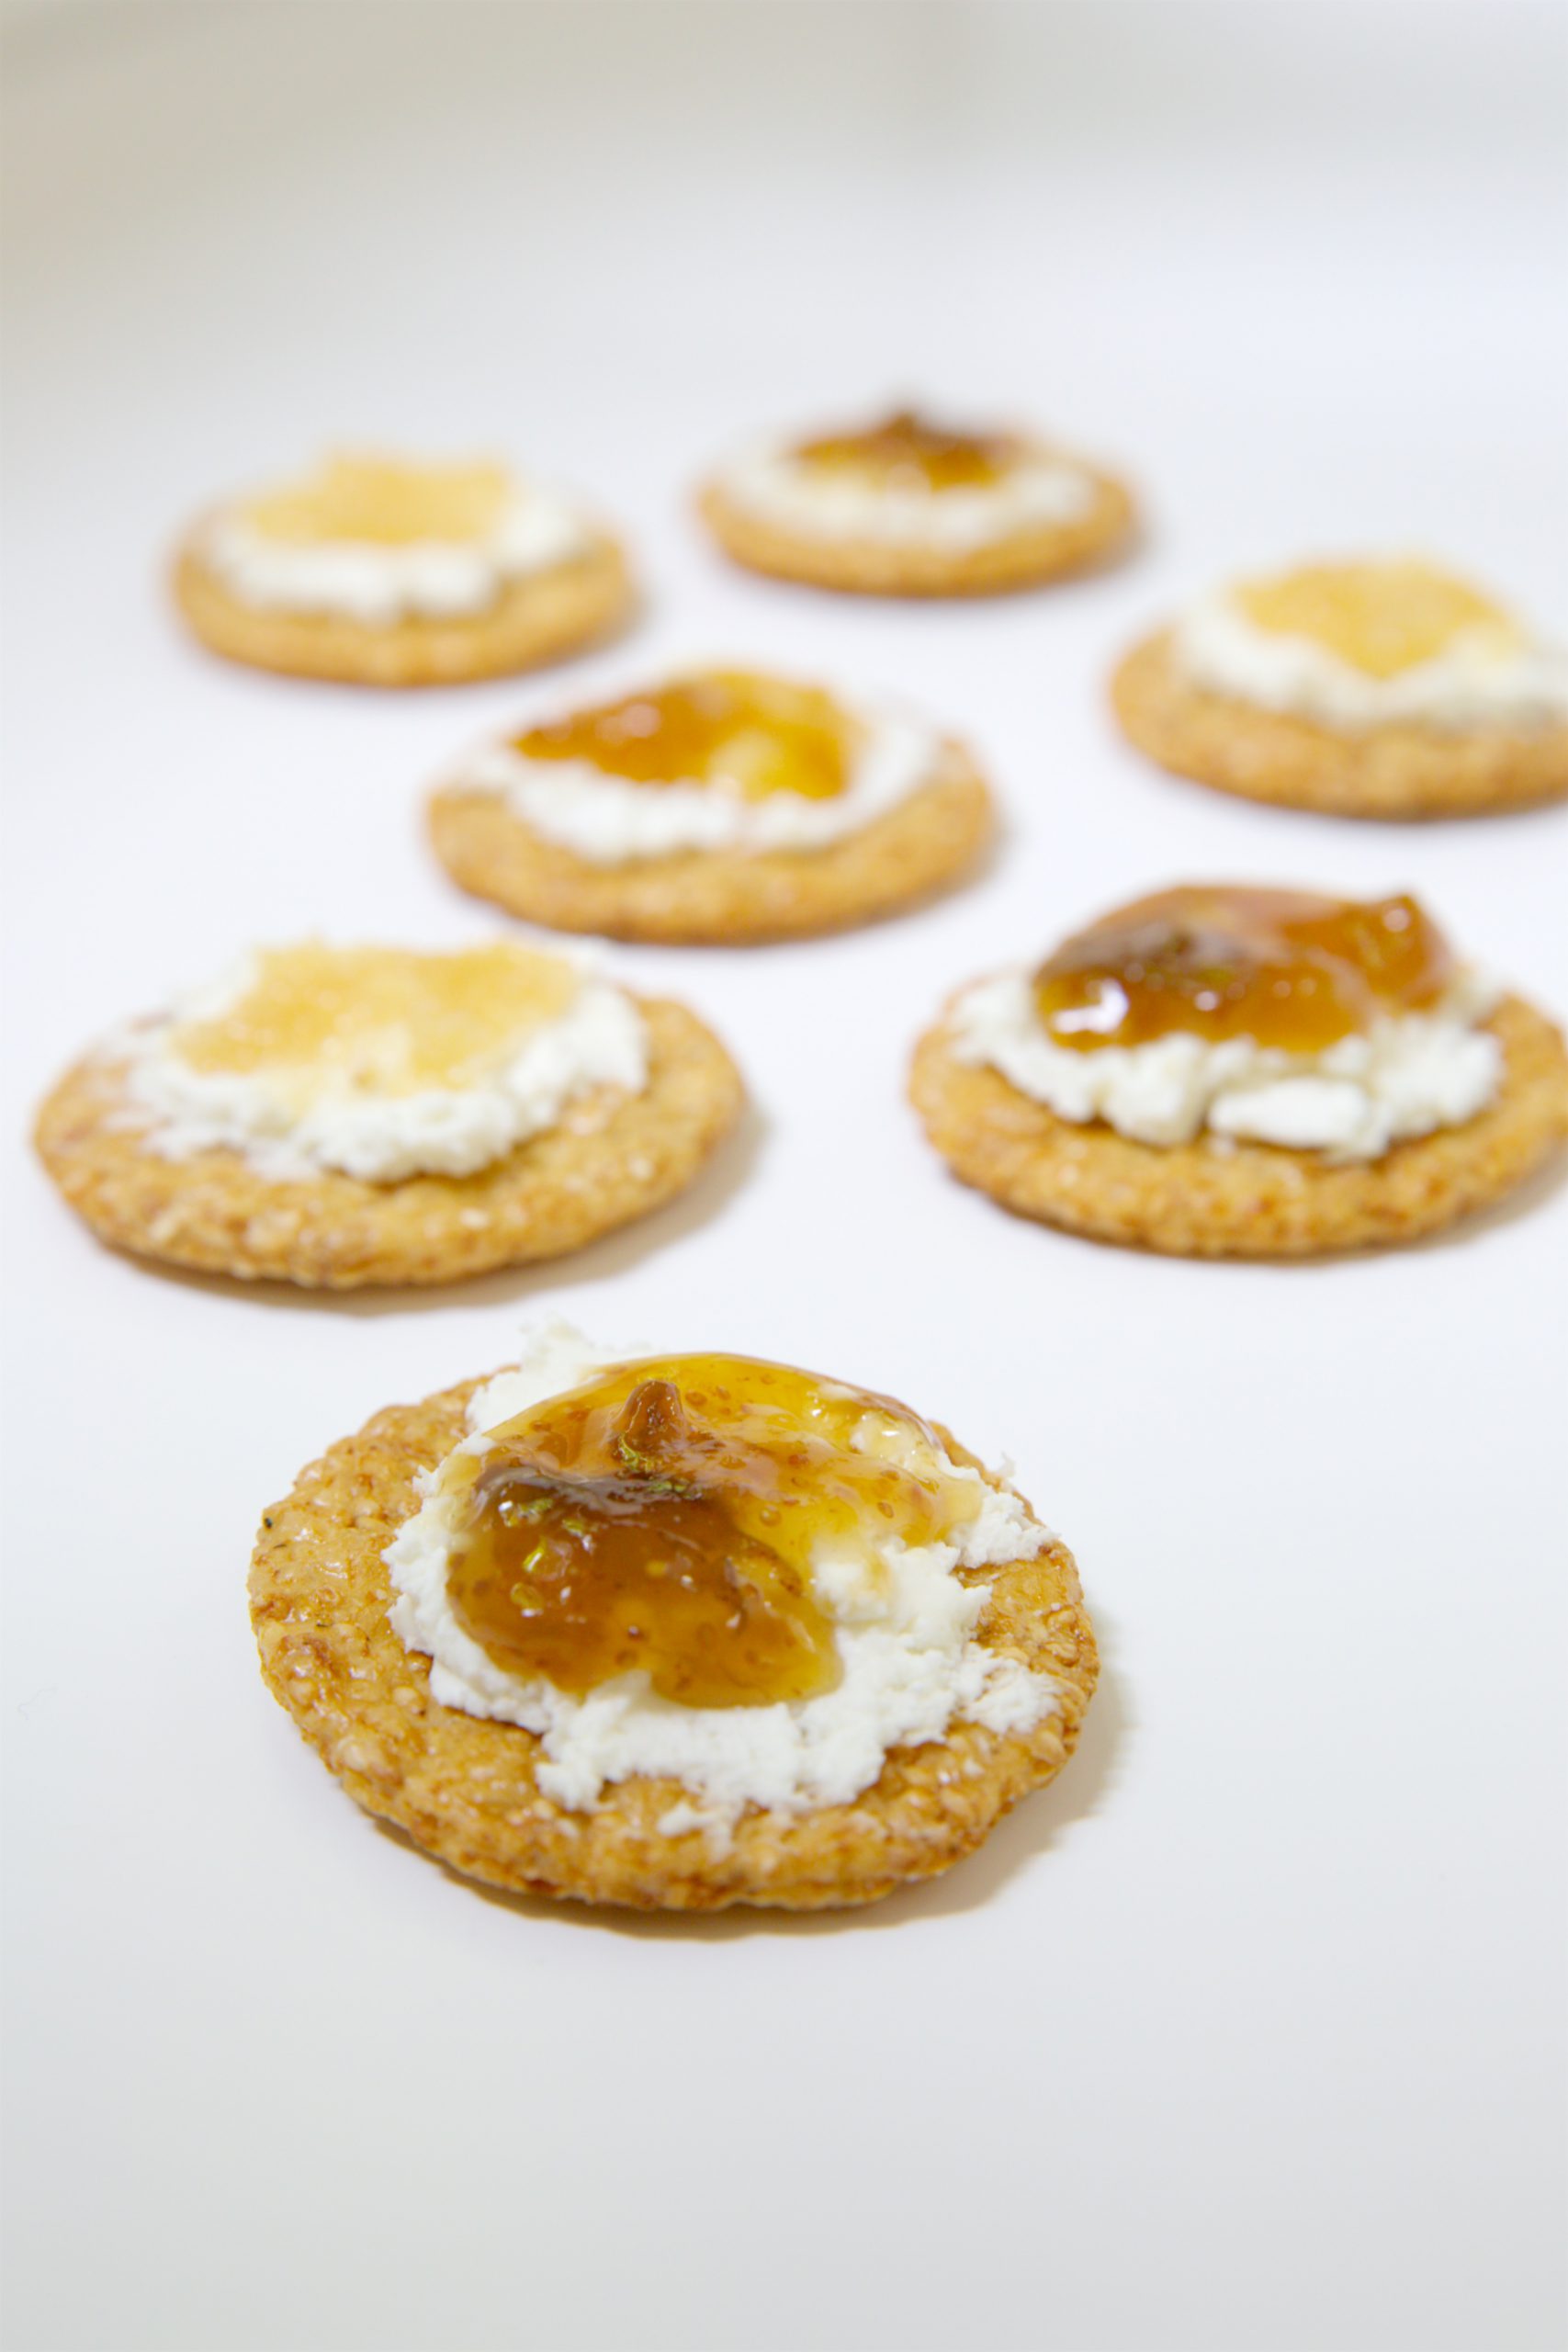 San-J Brown Rice Cracker with cream cheese and fruit spread